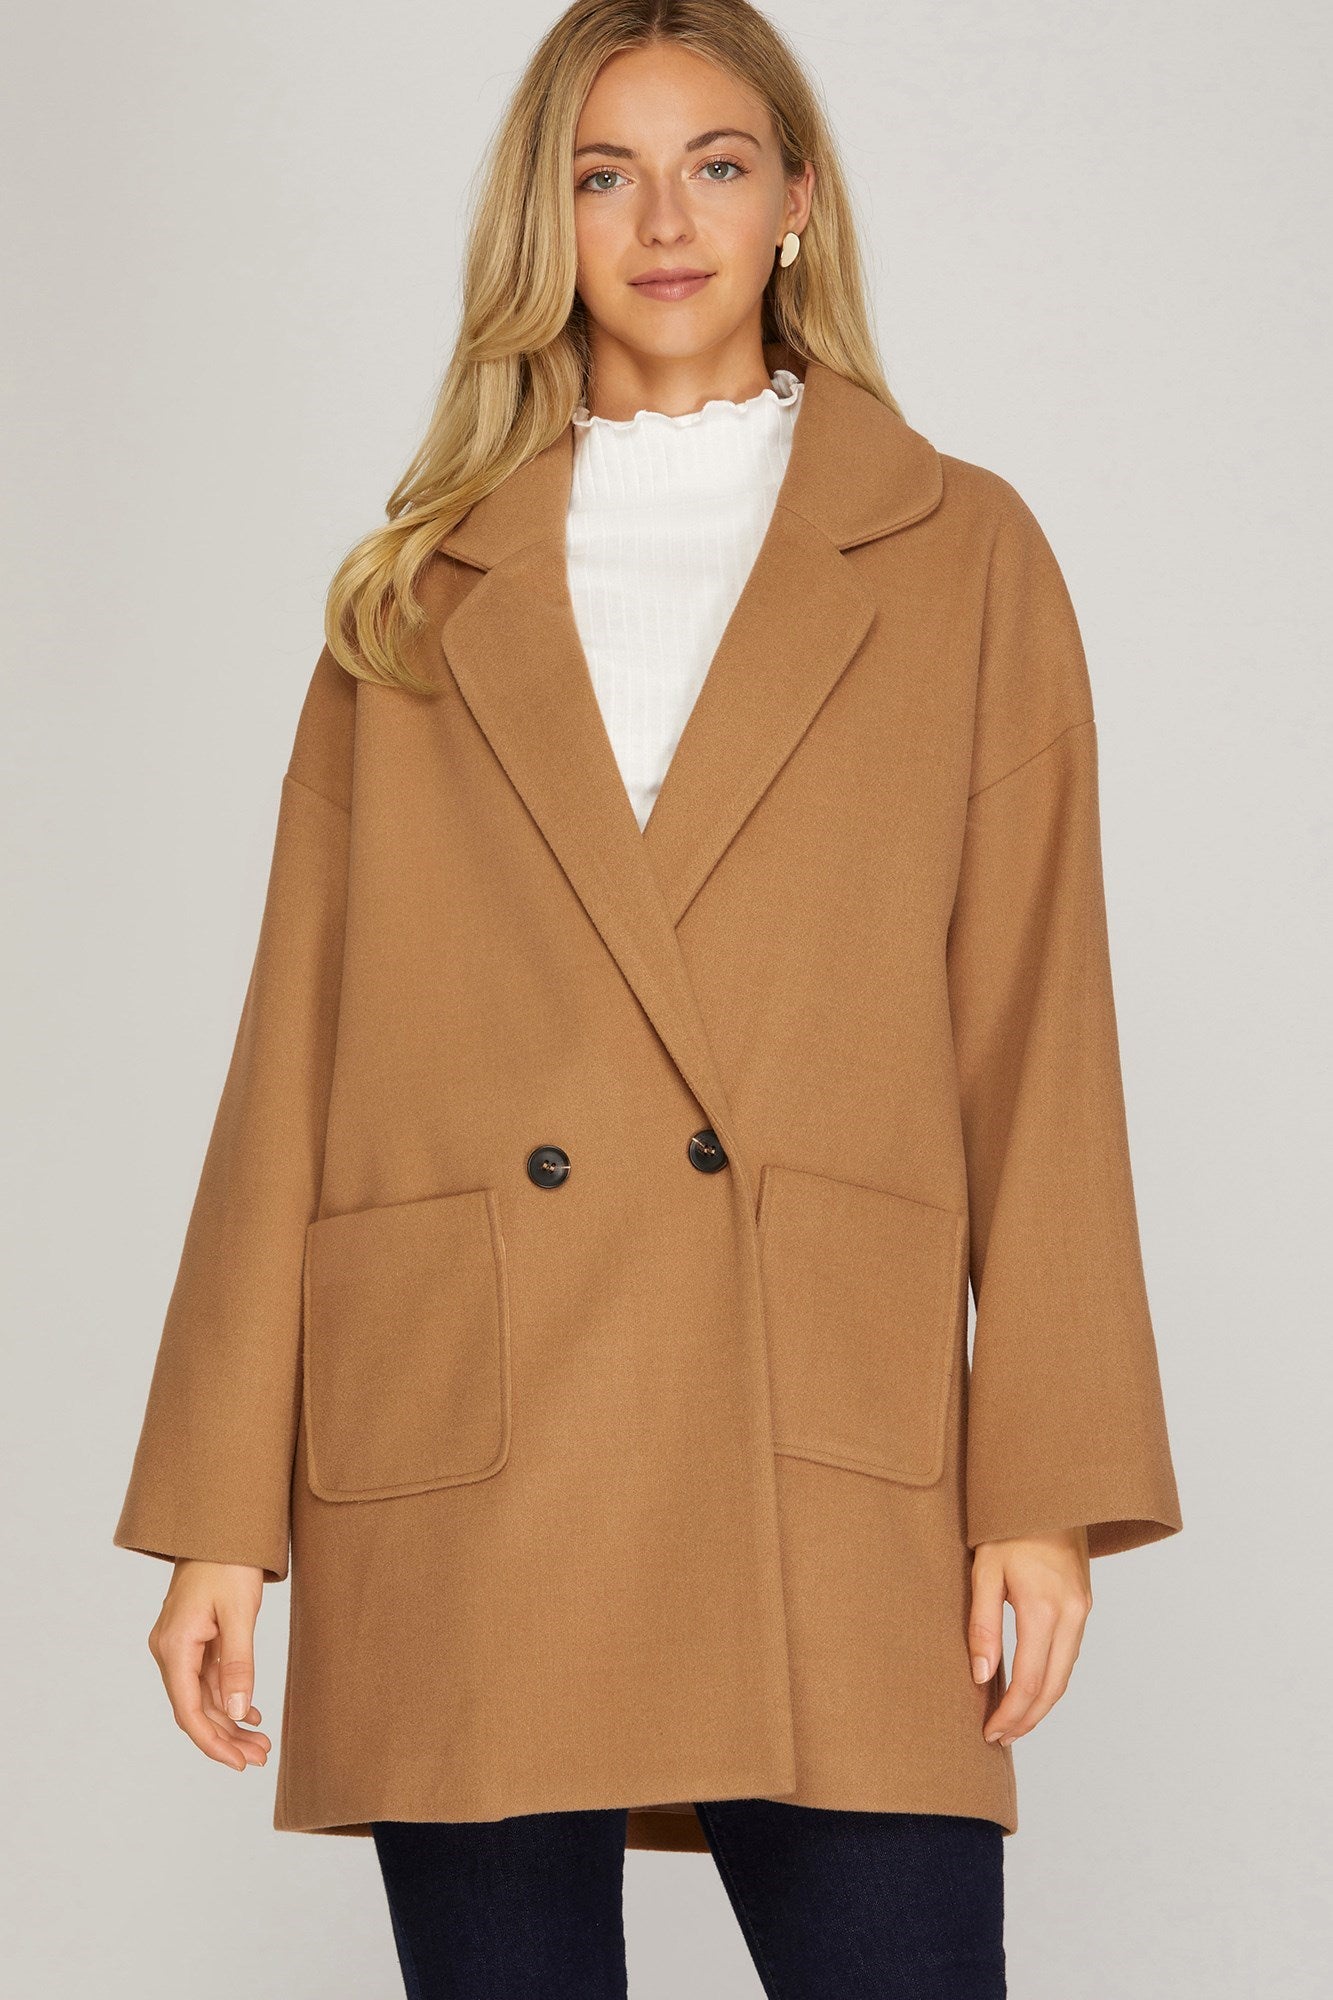 SHE AND SKY Women Jackets CAMEL BR / S Oversized Double Button Half Length Coat || David's Clothing SY4606